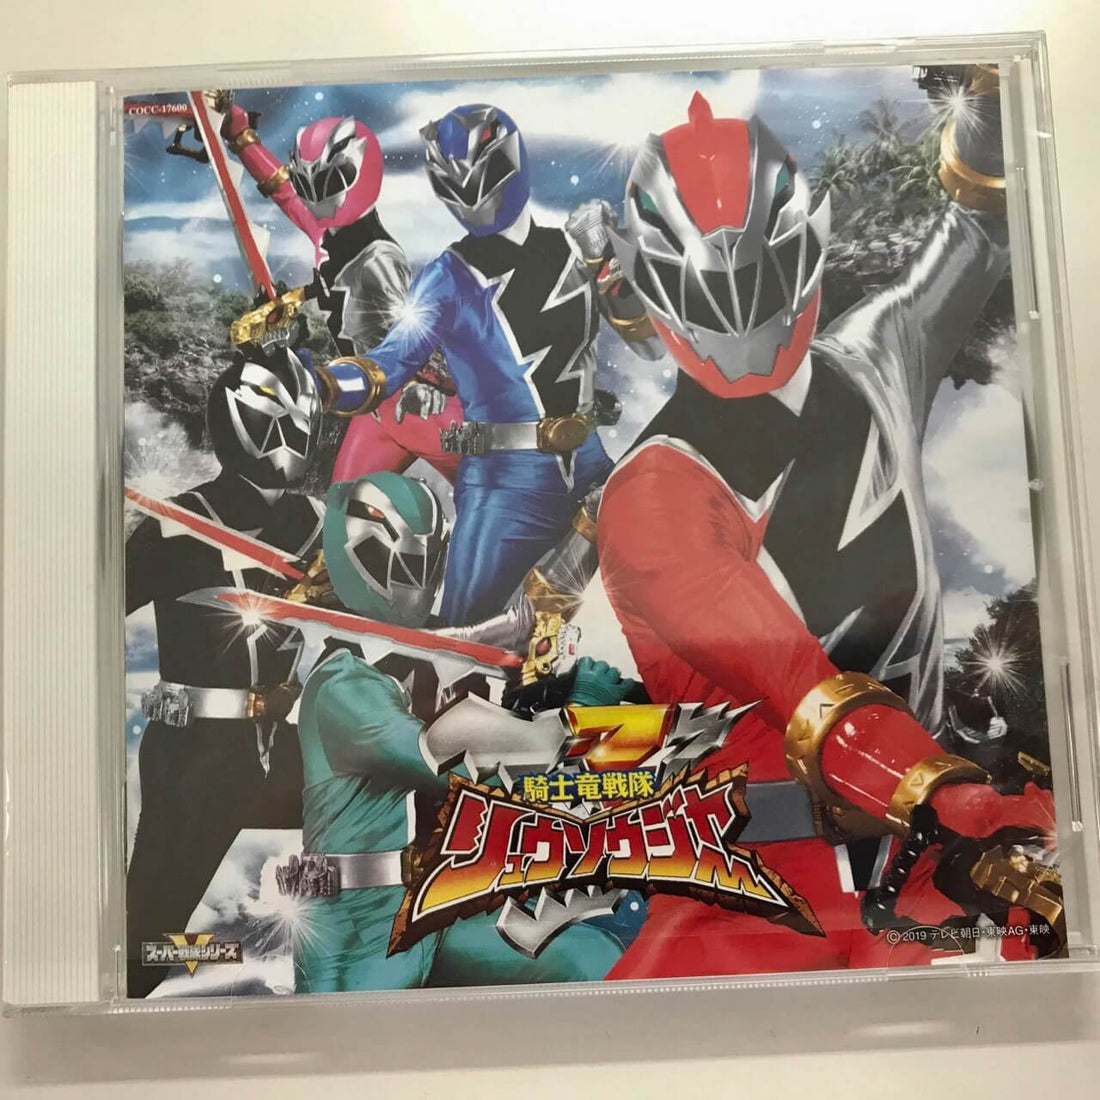 Ryusoulger Theme Songs are GO for our CSTOYS Toku Was Request!